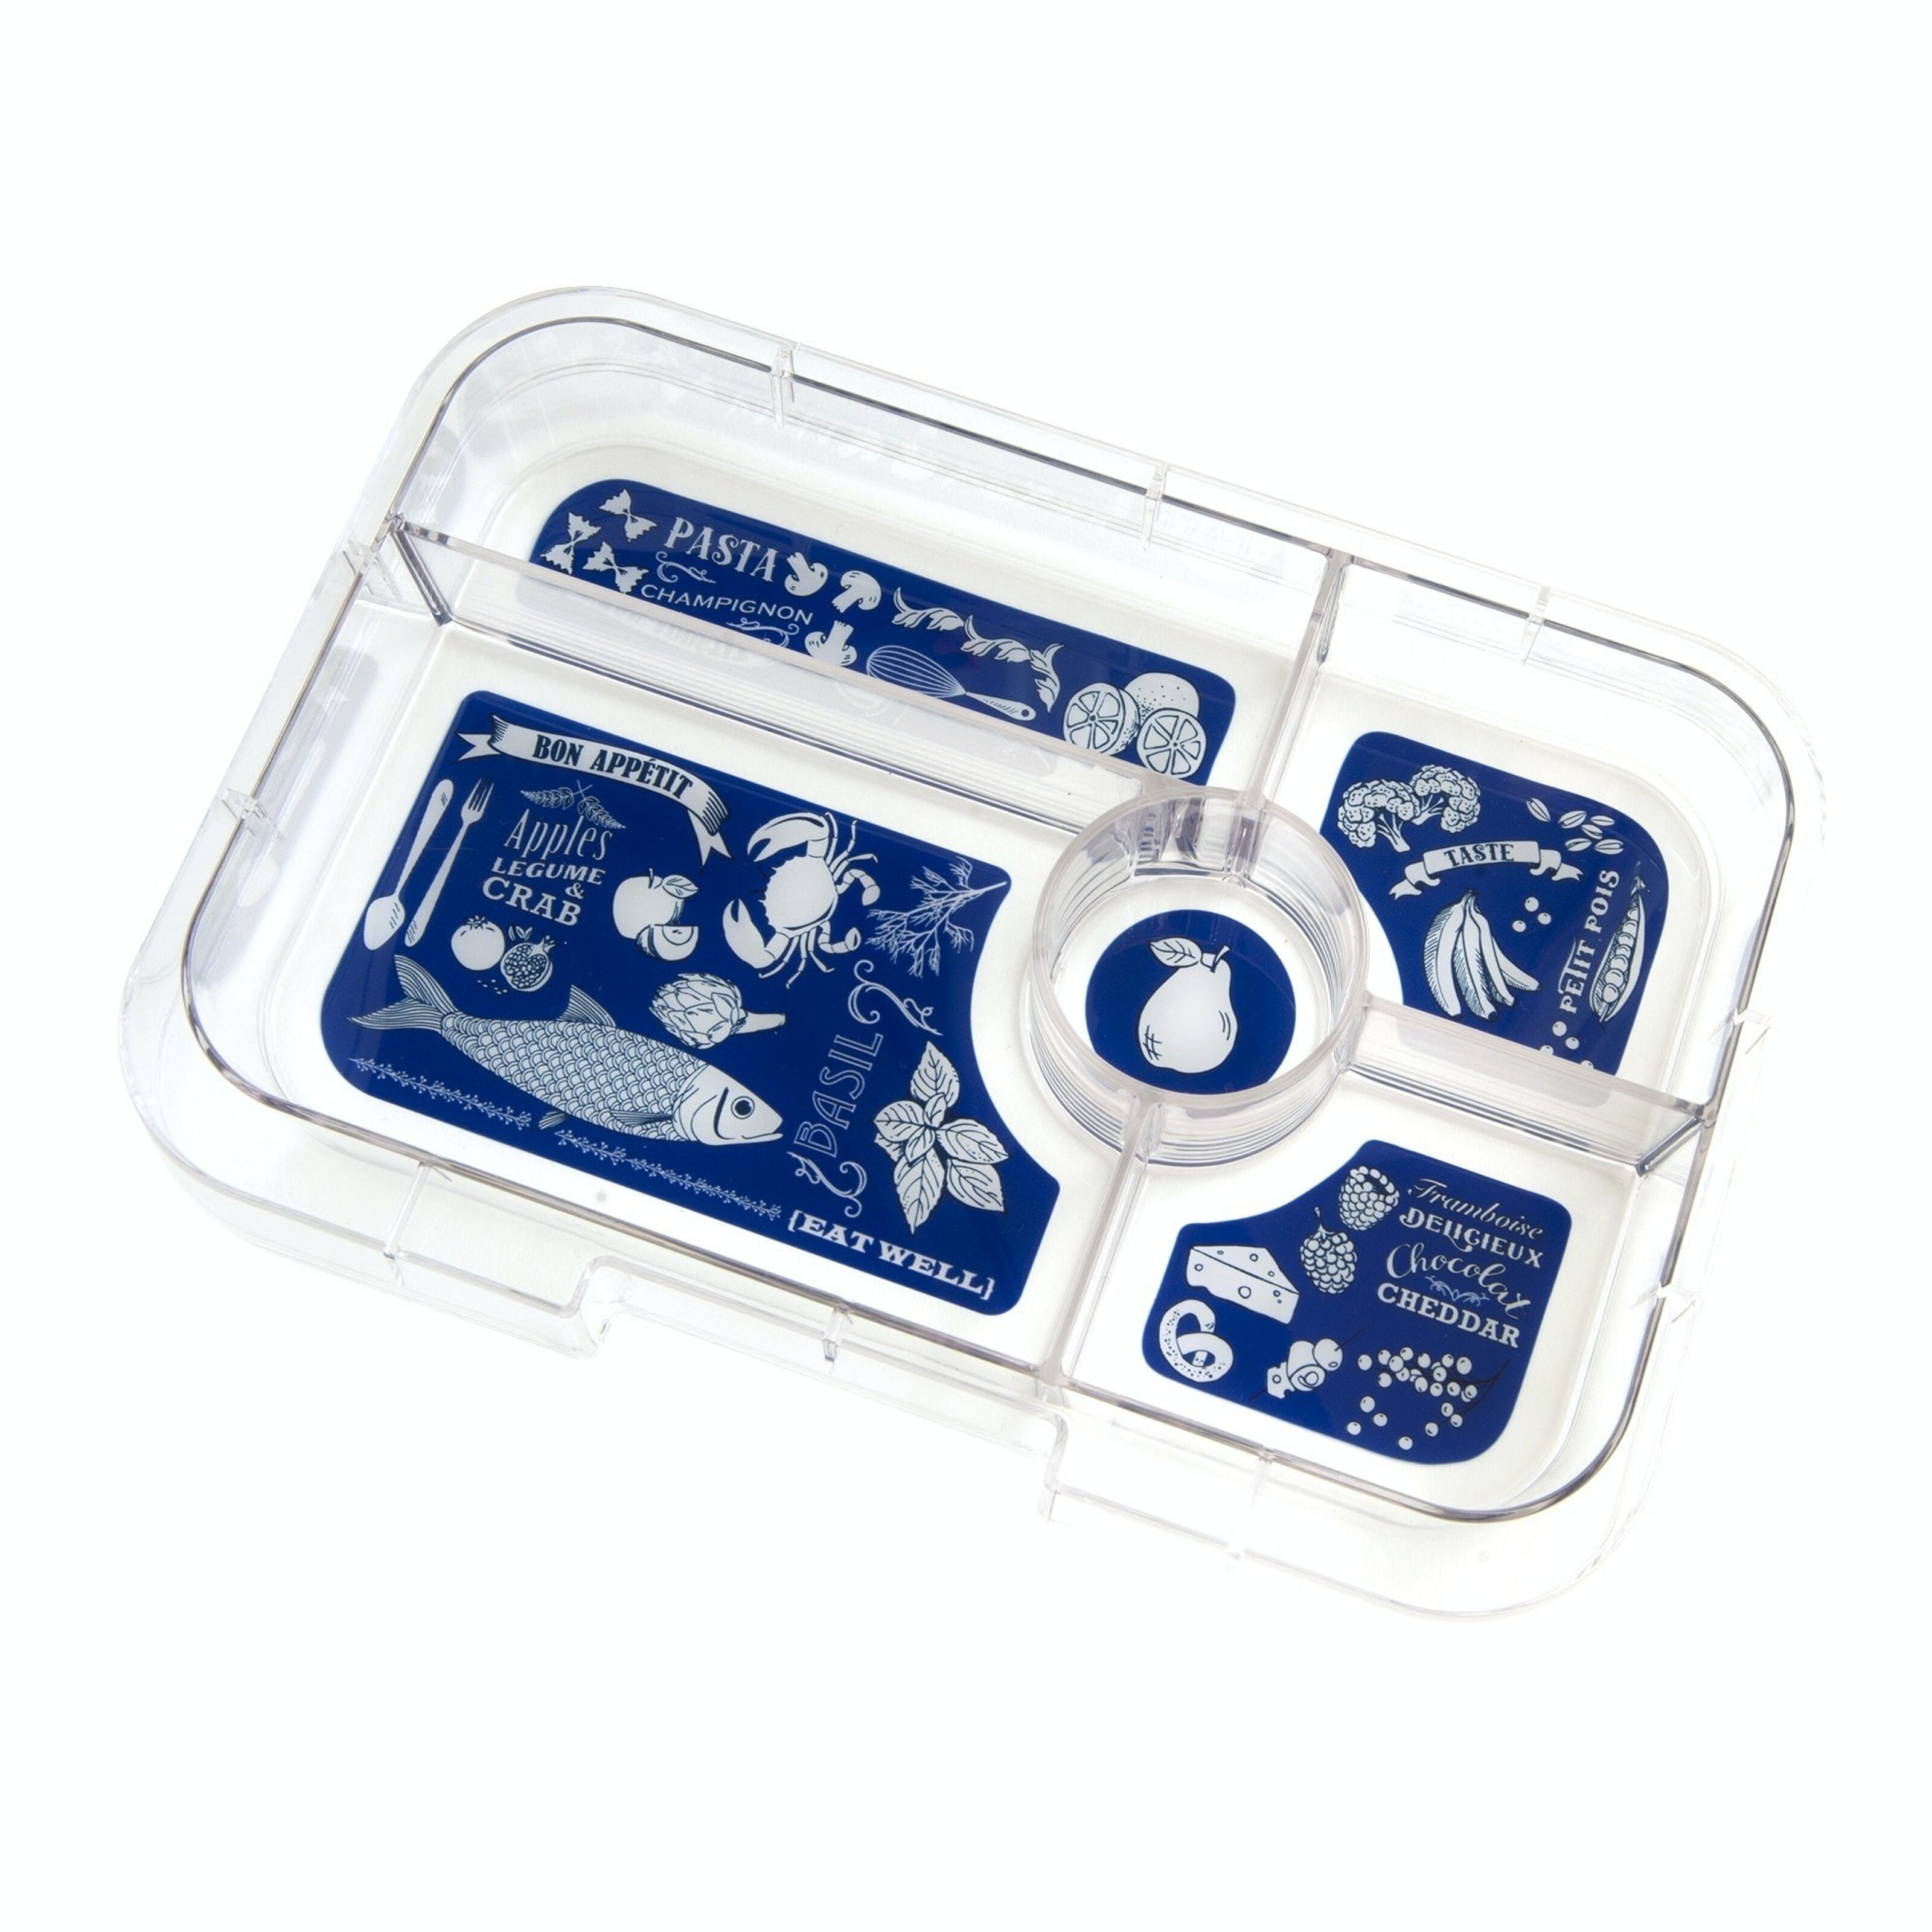 Buy wholesale Yumbox Tapas XL bento lunchbox extra tray 5-sections